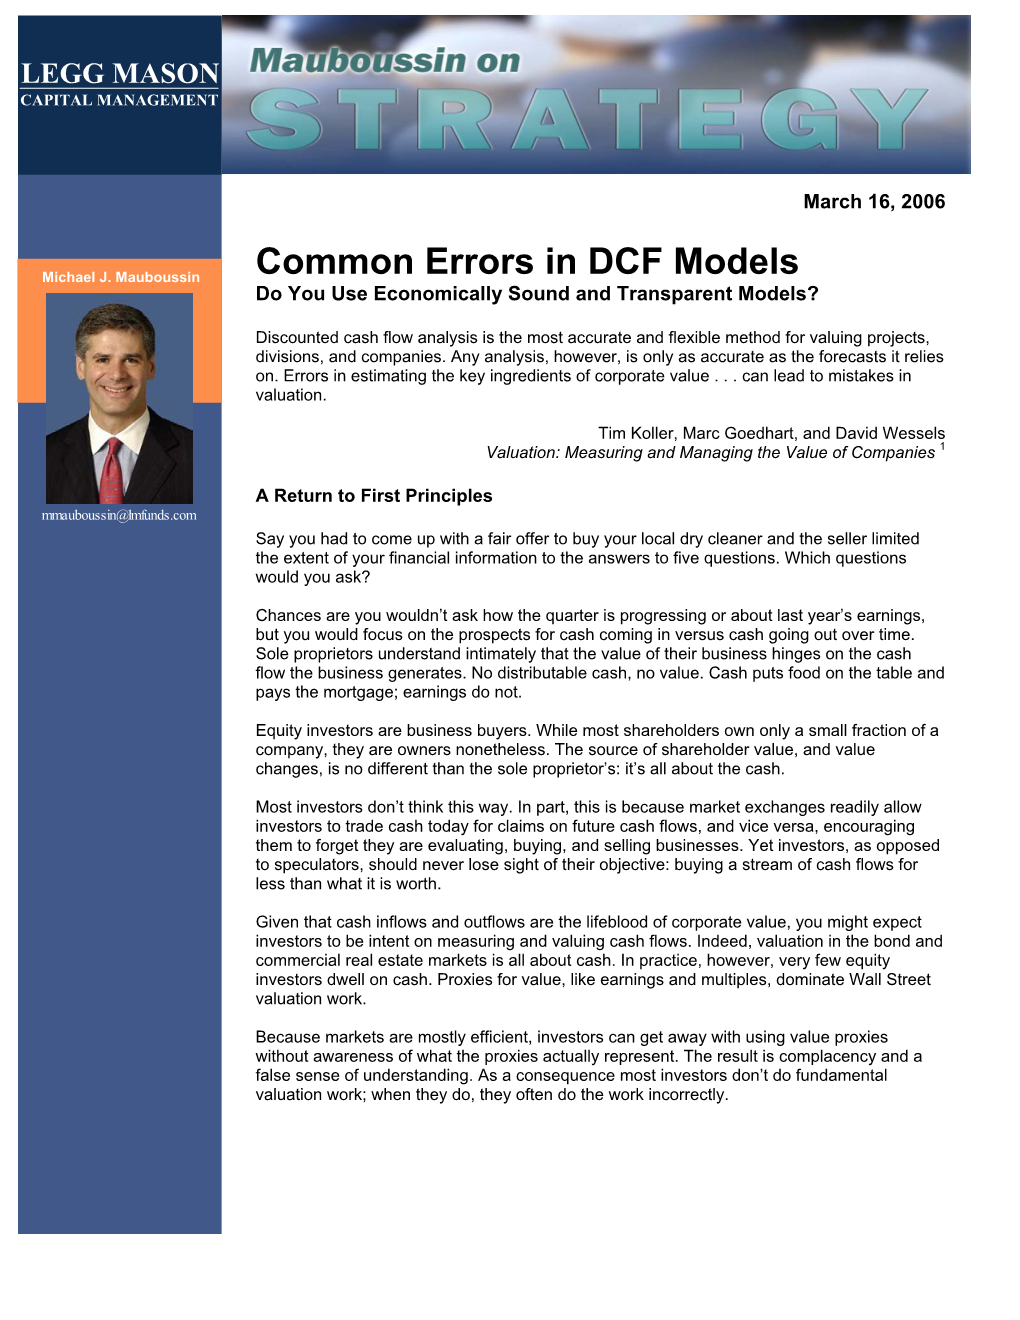 Common Errors in DCF Models Do You Use Economically Sound and Transparent Models?